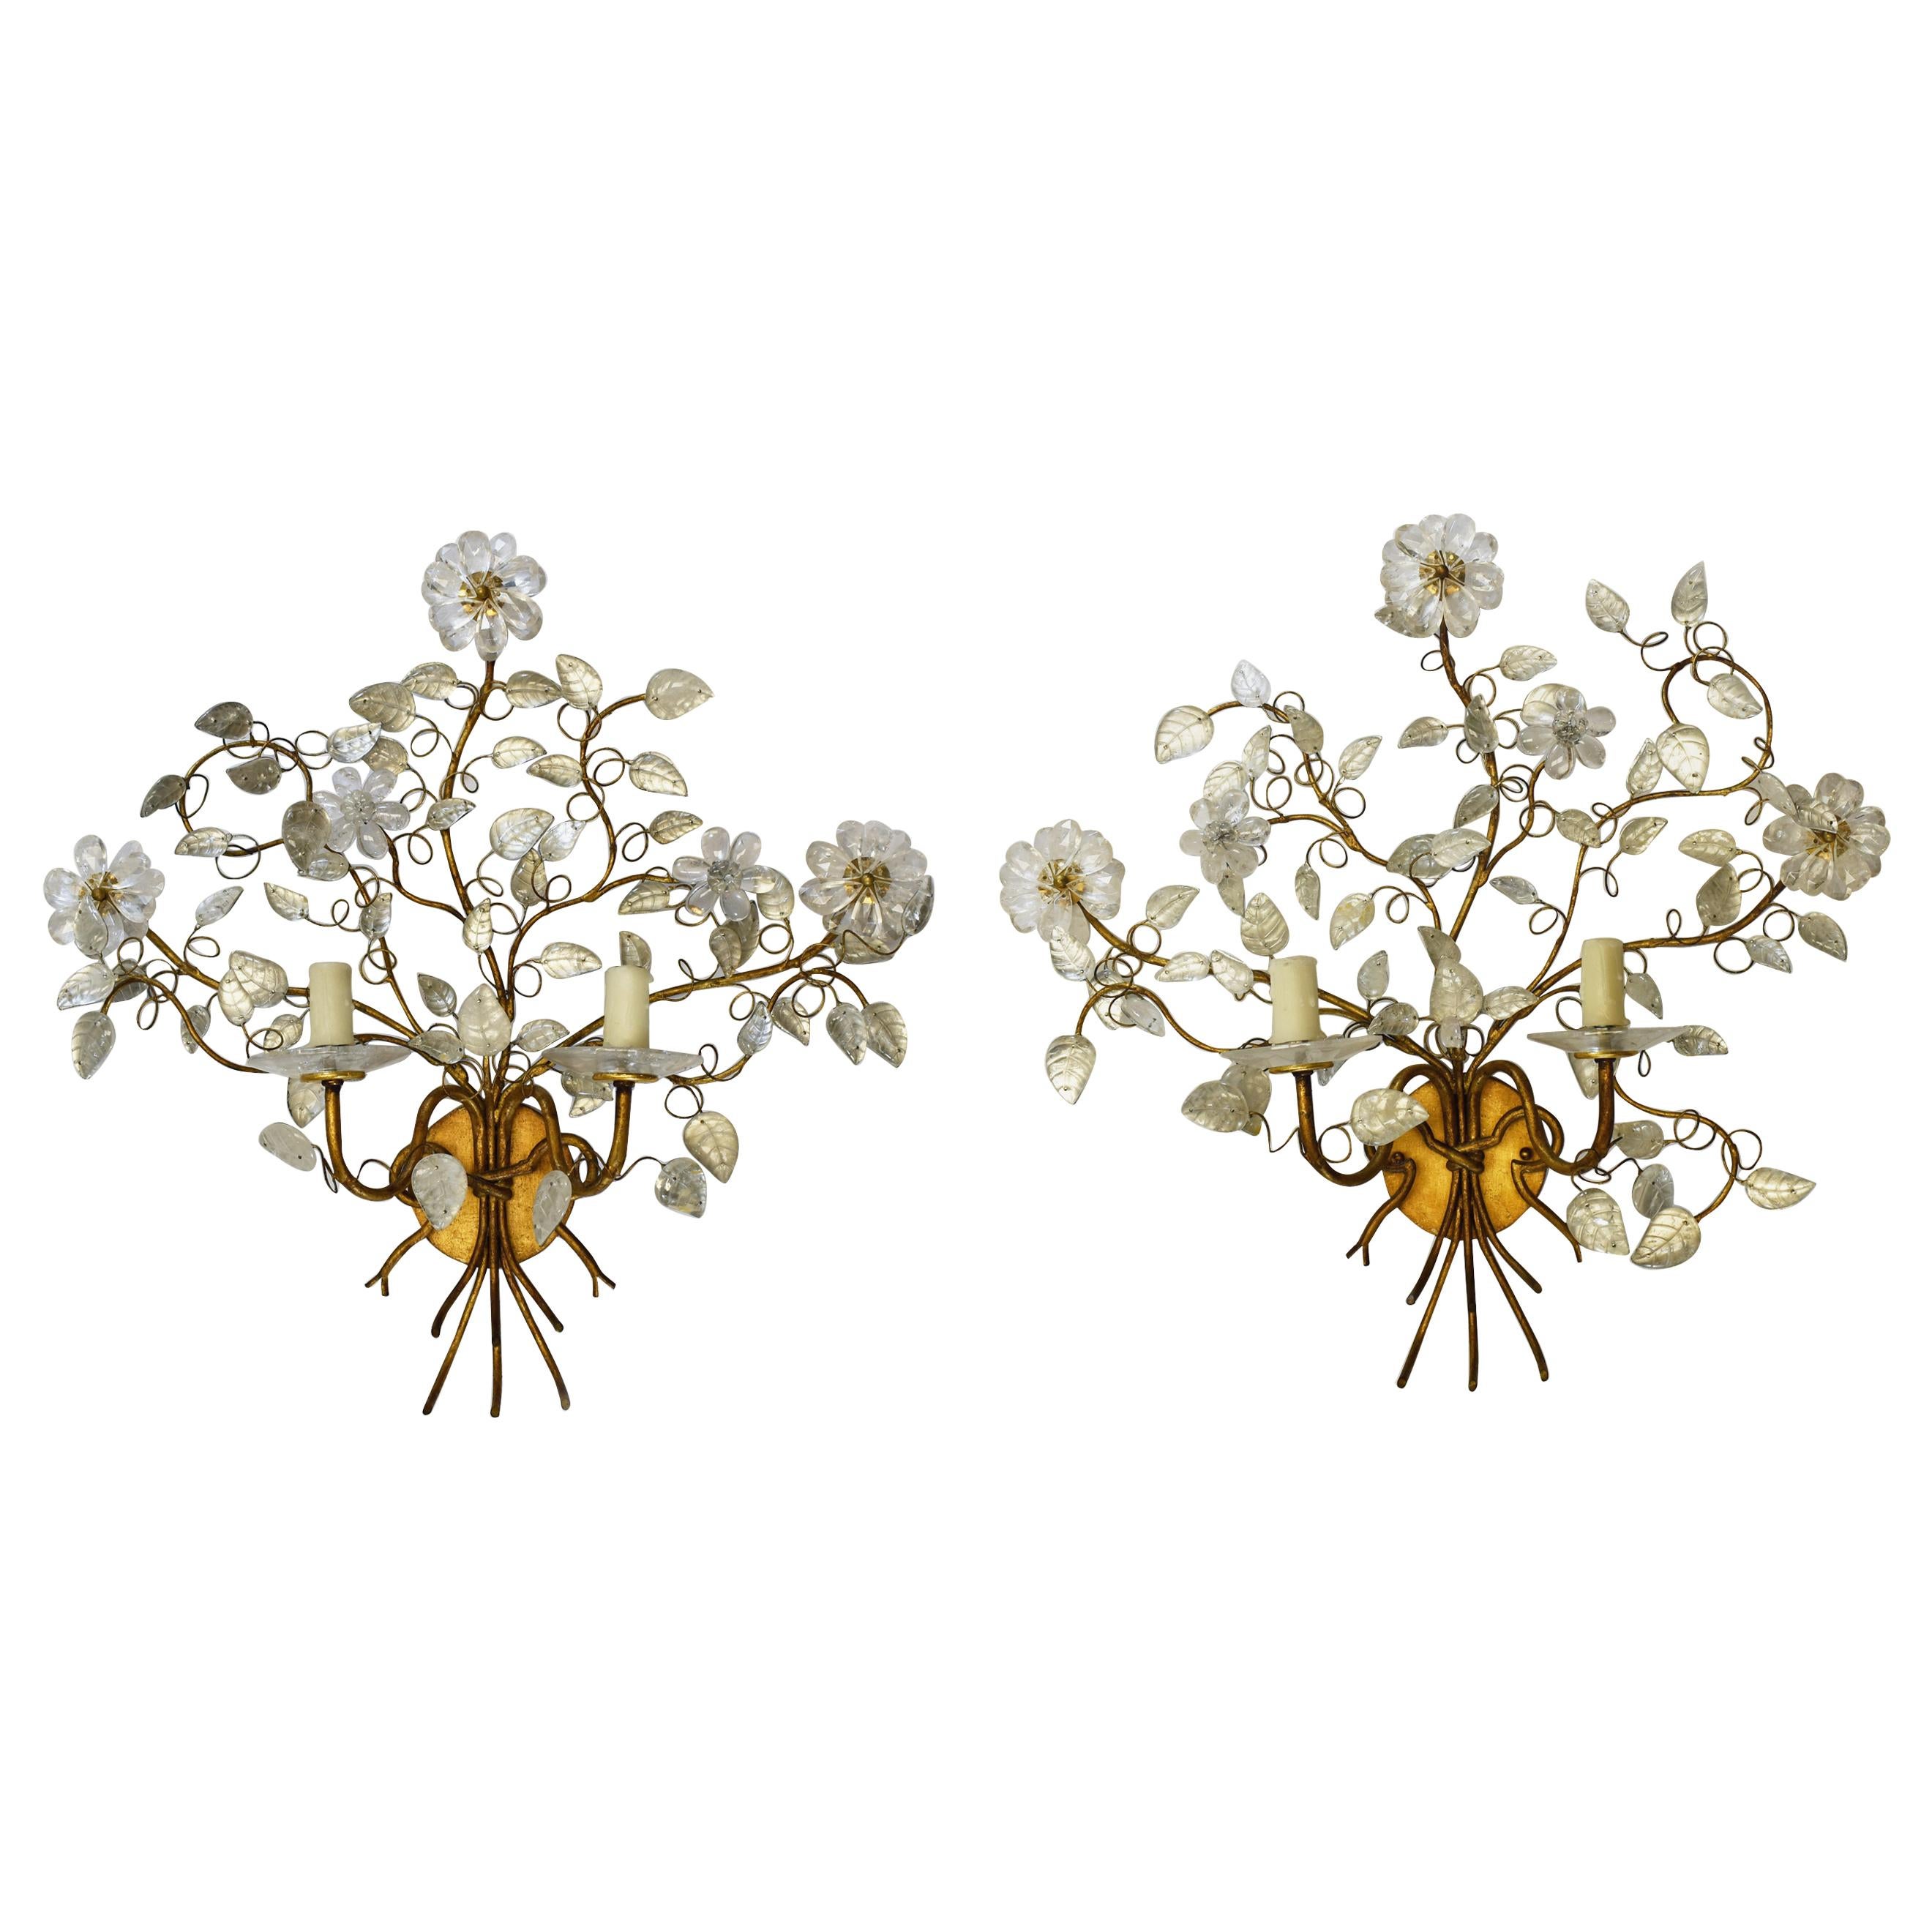 Pair of Modern Style Rock Crystal Floral Sconces For Sale